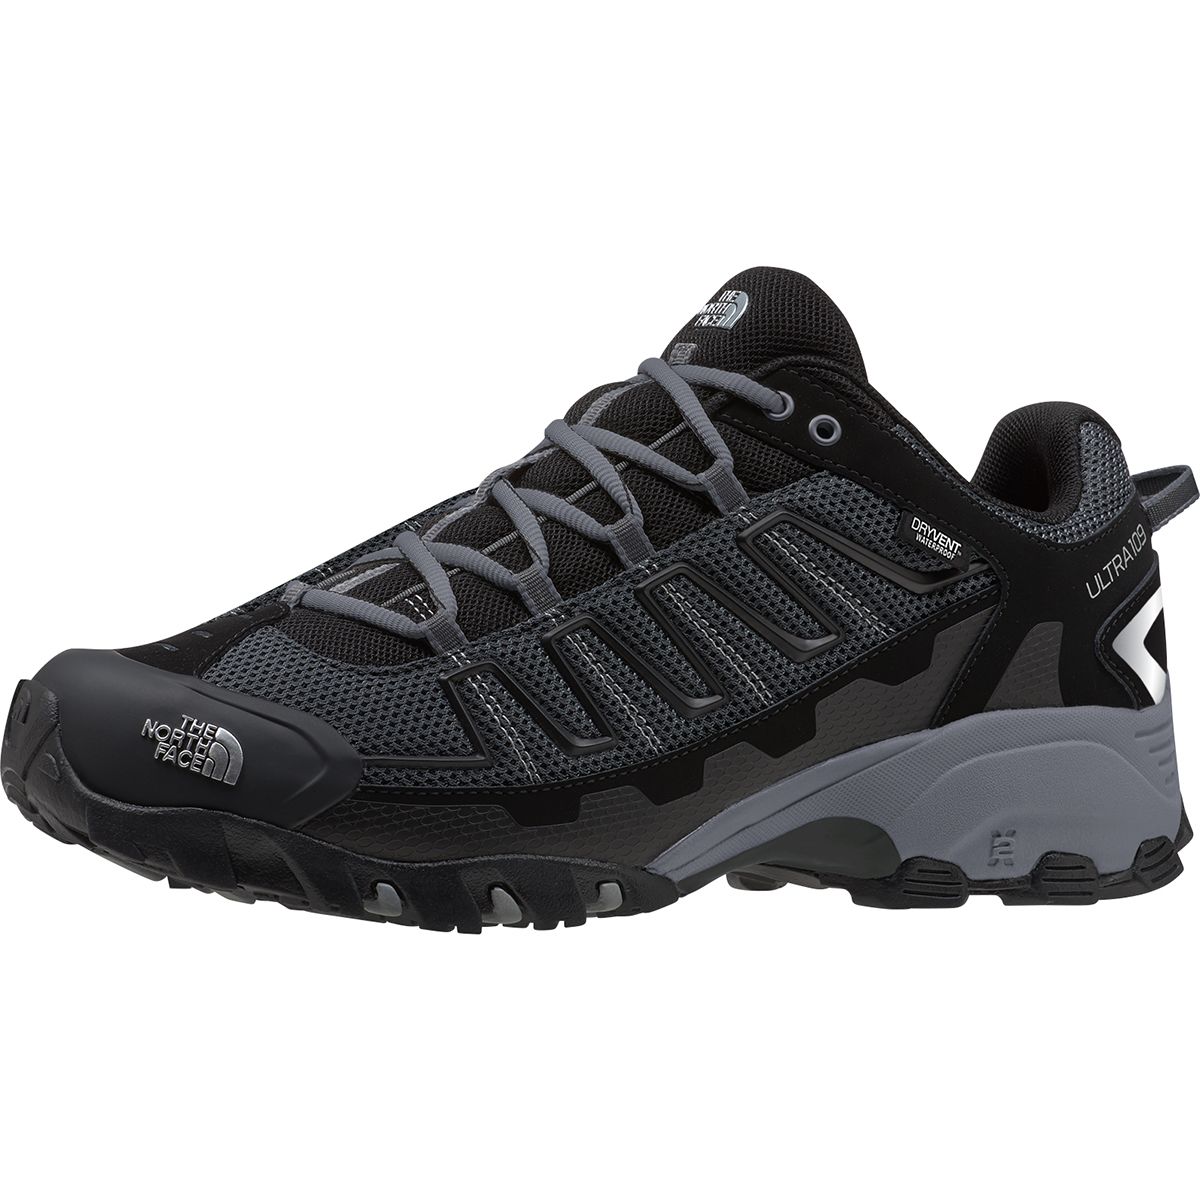 The North Face Ultra 109 Waterproof Trail Running Shoe - Men's